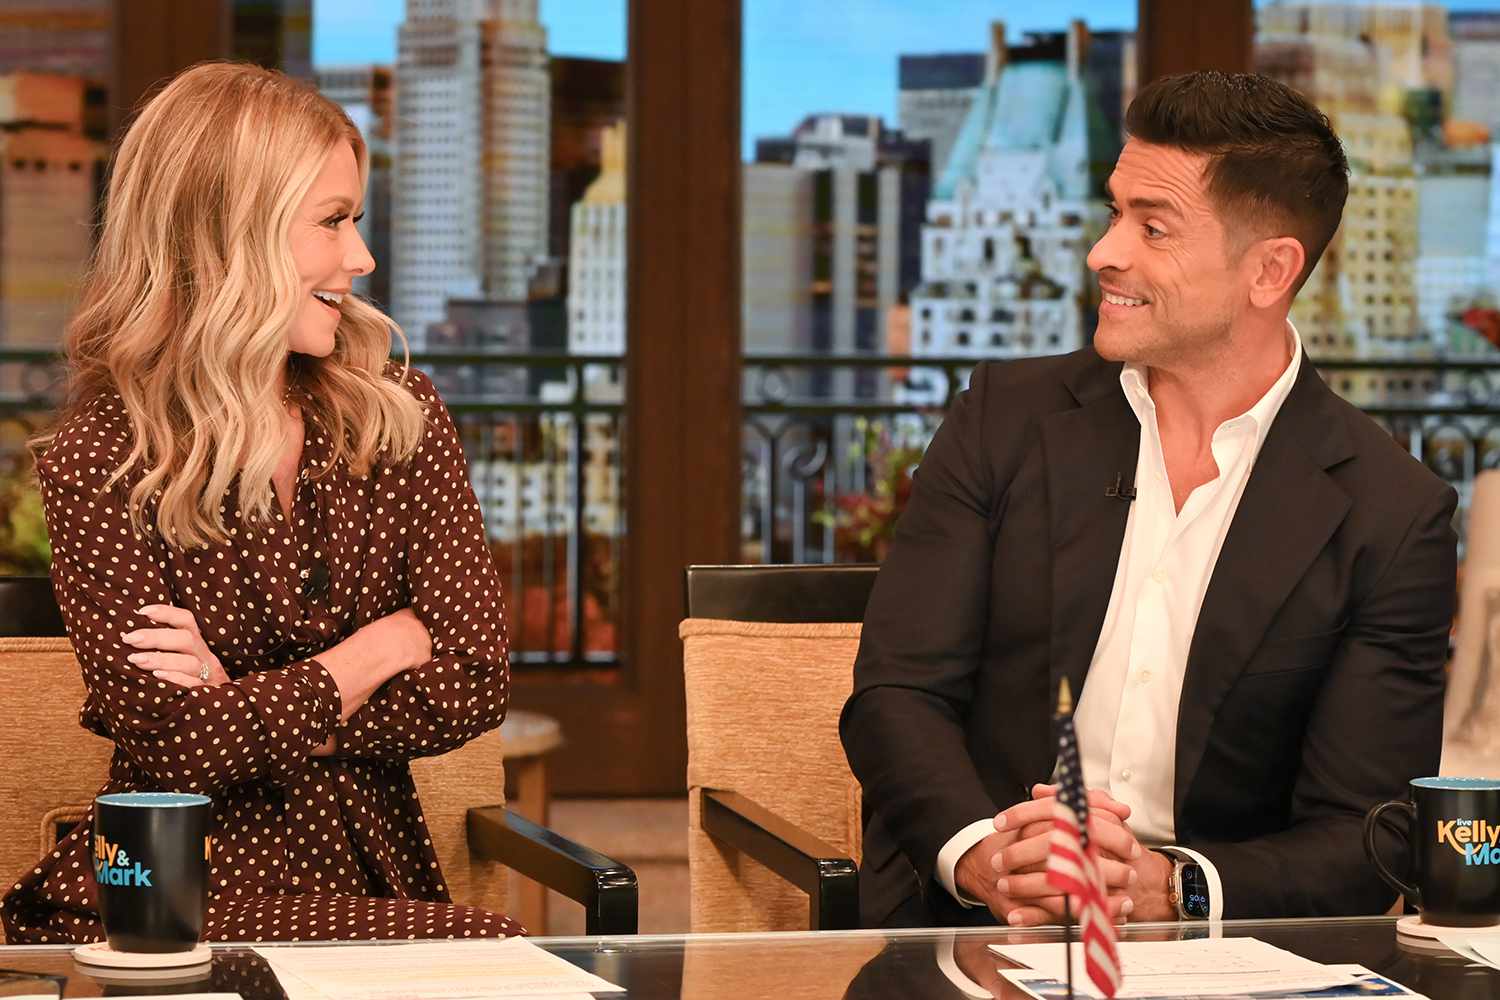 Kelly Ripa and Mark Consuelos Admit They 'Squabble' and Share One Early Source of Conflict in Their Marriage